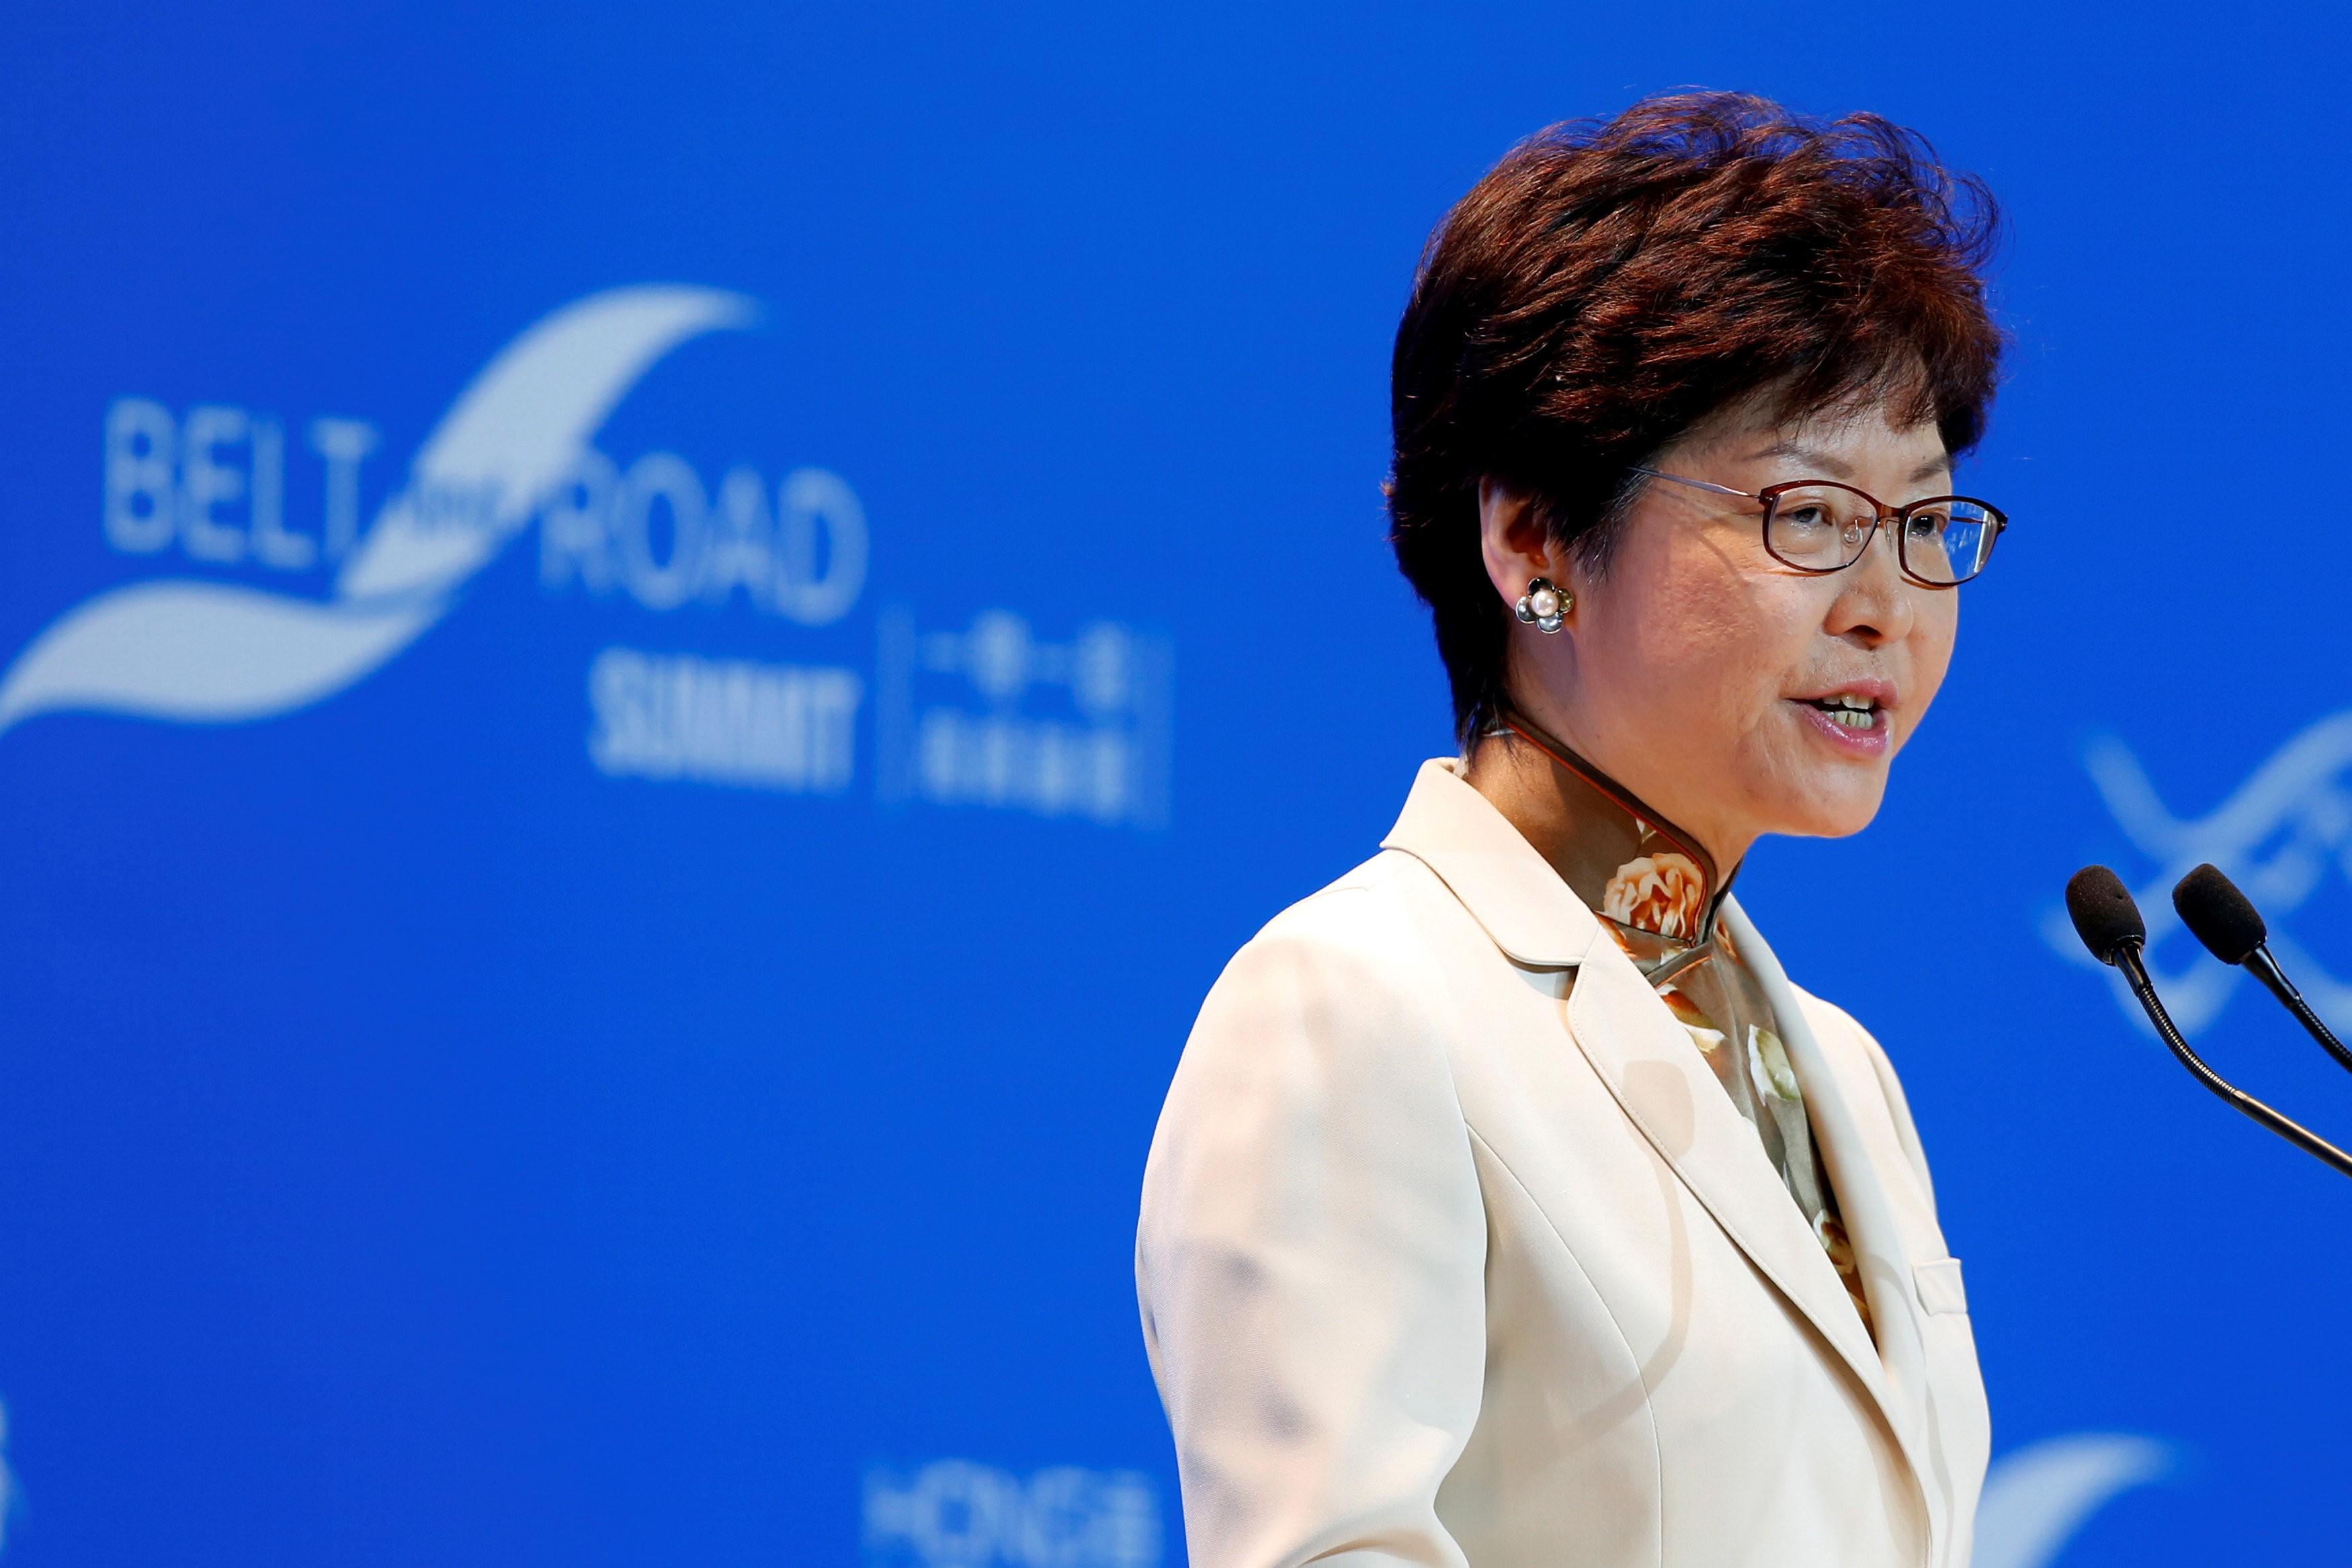 Hong Kong Chief Executive Carrie Lam addresses the Belt and Road Summit in Hong Kong on September 11, 2017. Photo: Reuters